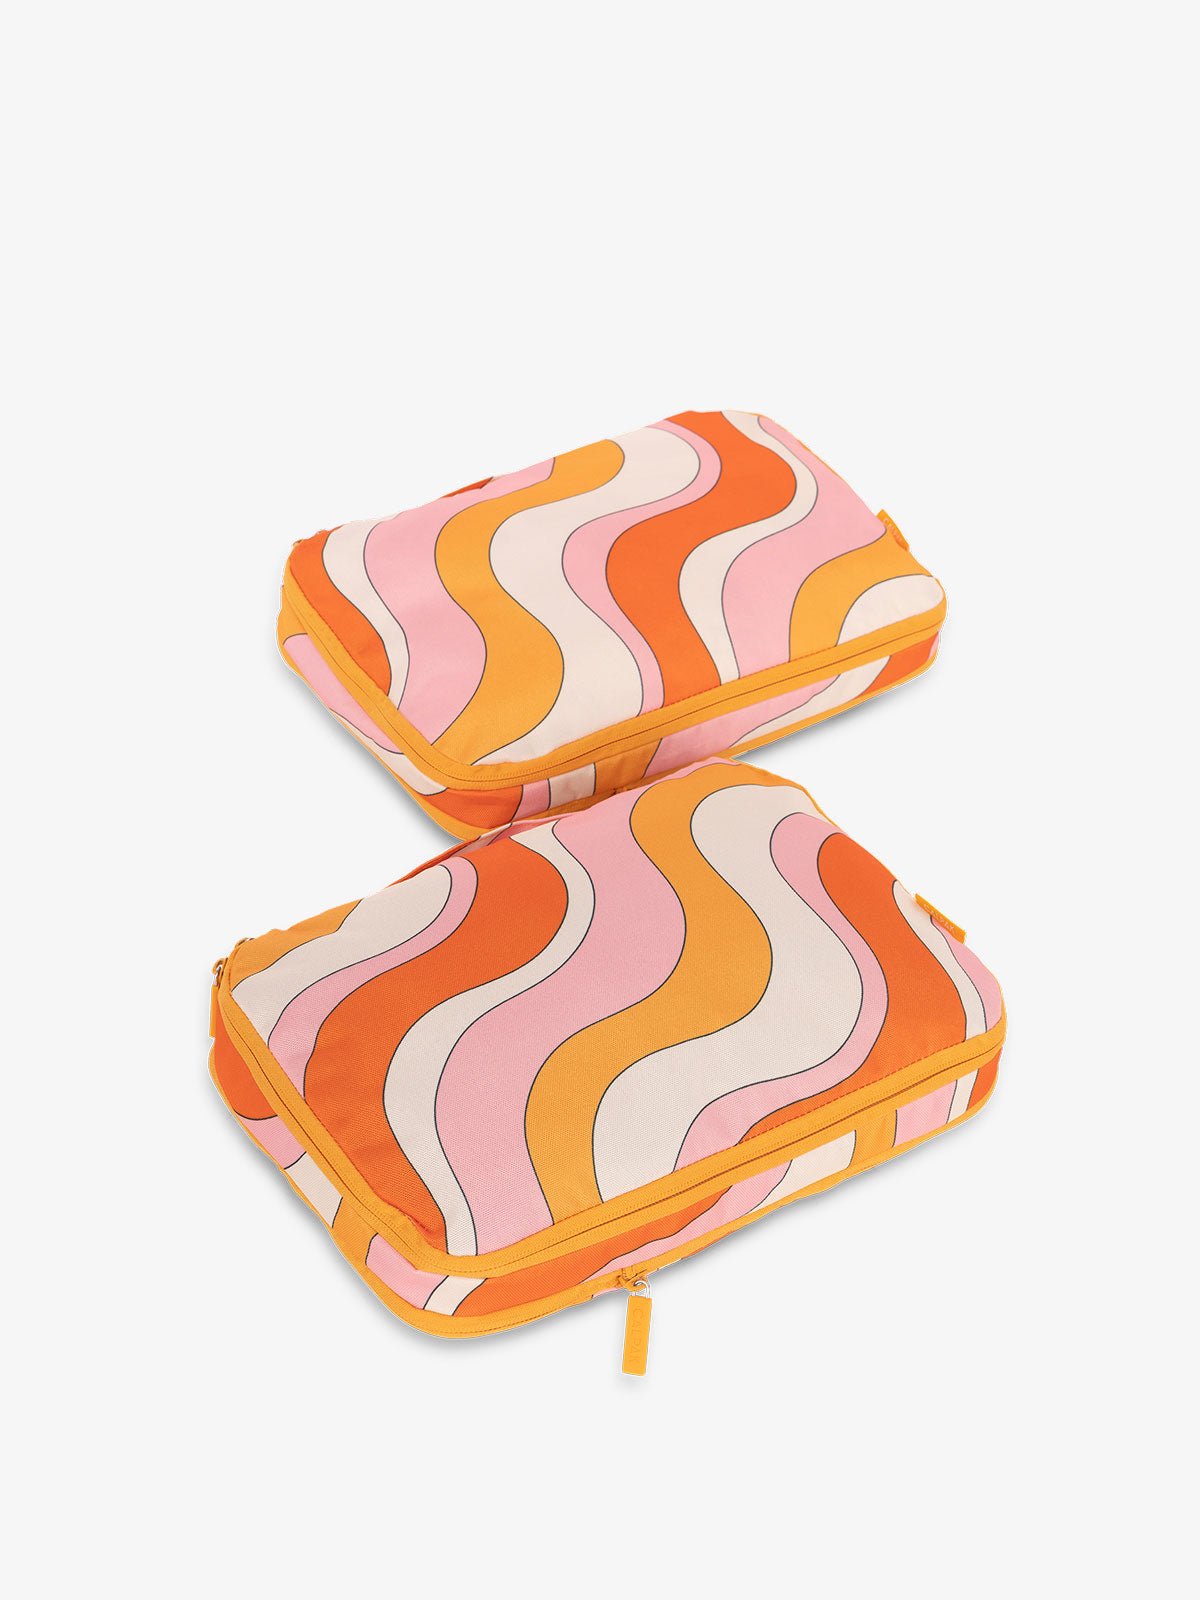 CALPAK compression packing cubes in retro sunset